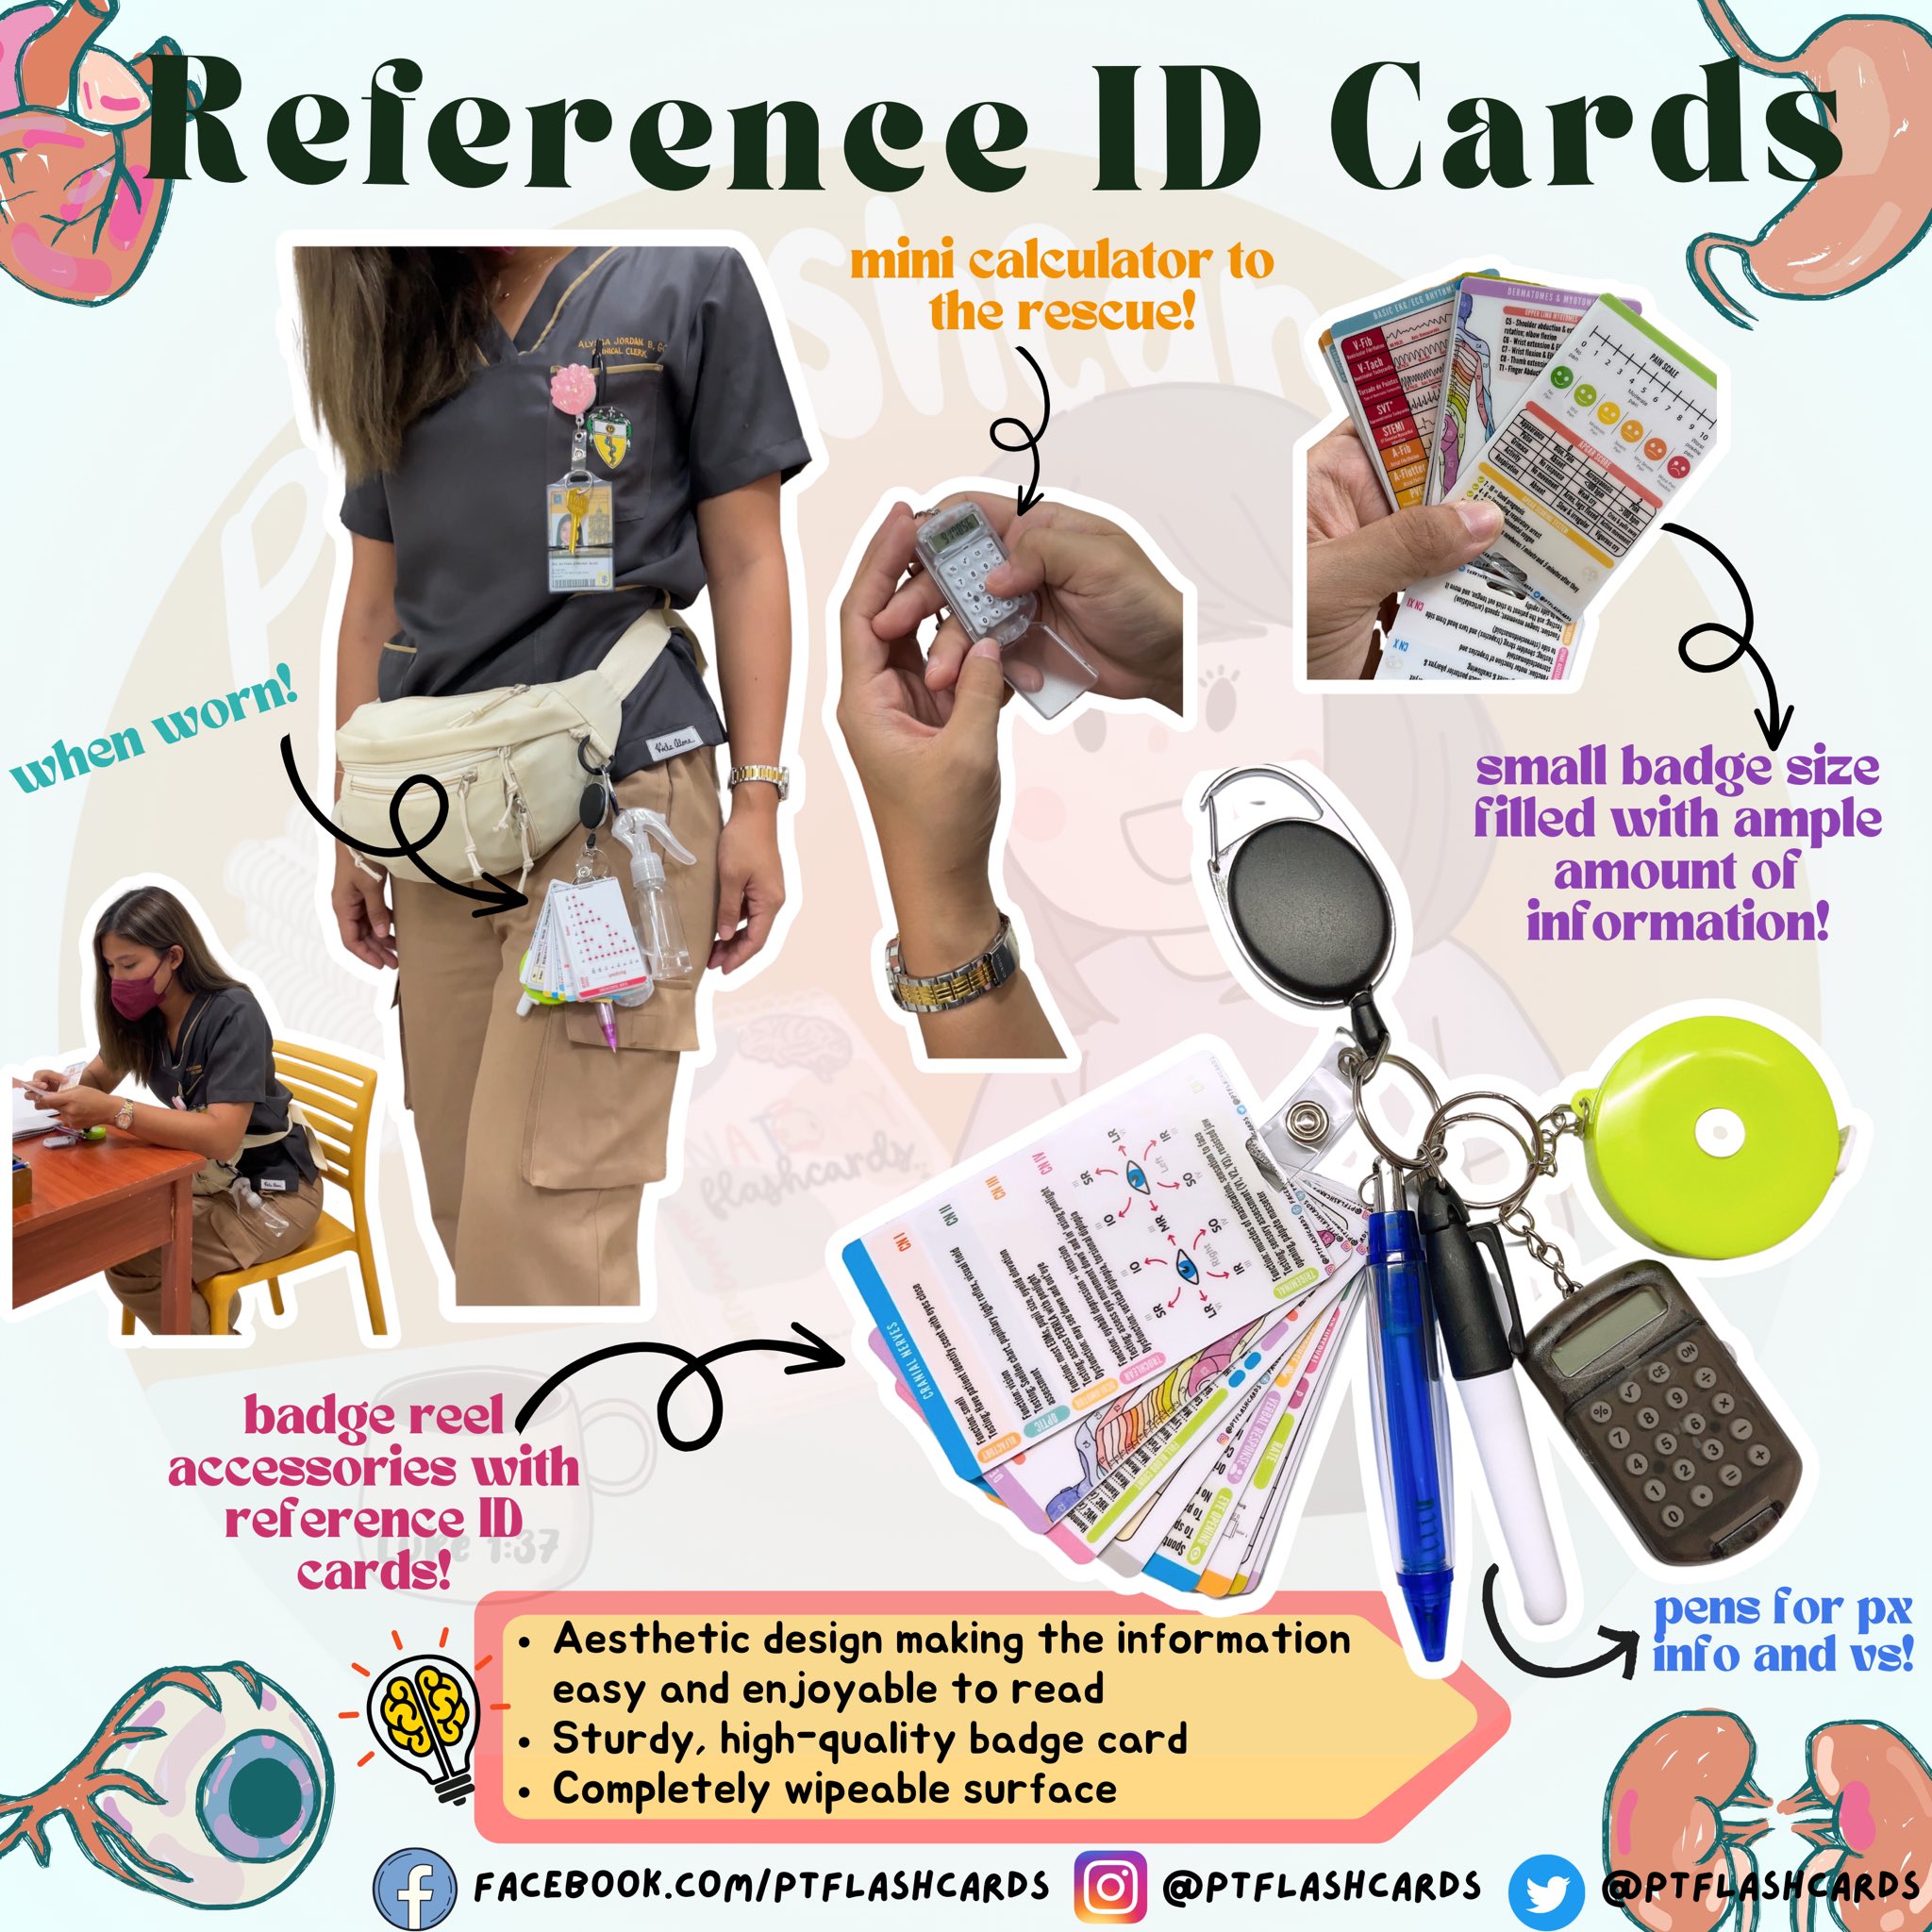 PT flashcards on X: BADGE REEL ACCESSORIES X REFERENCE ID CARDS